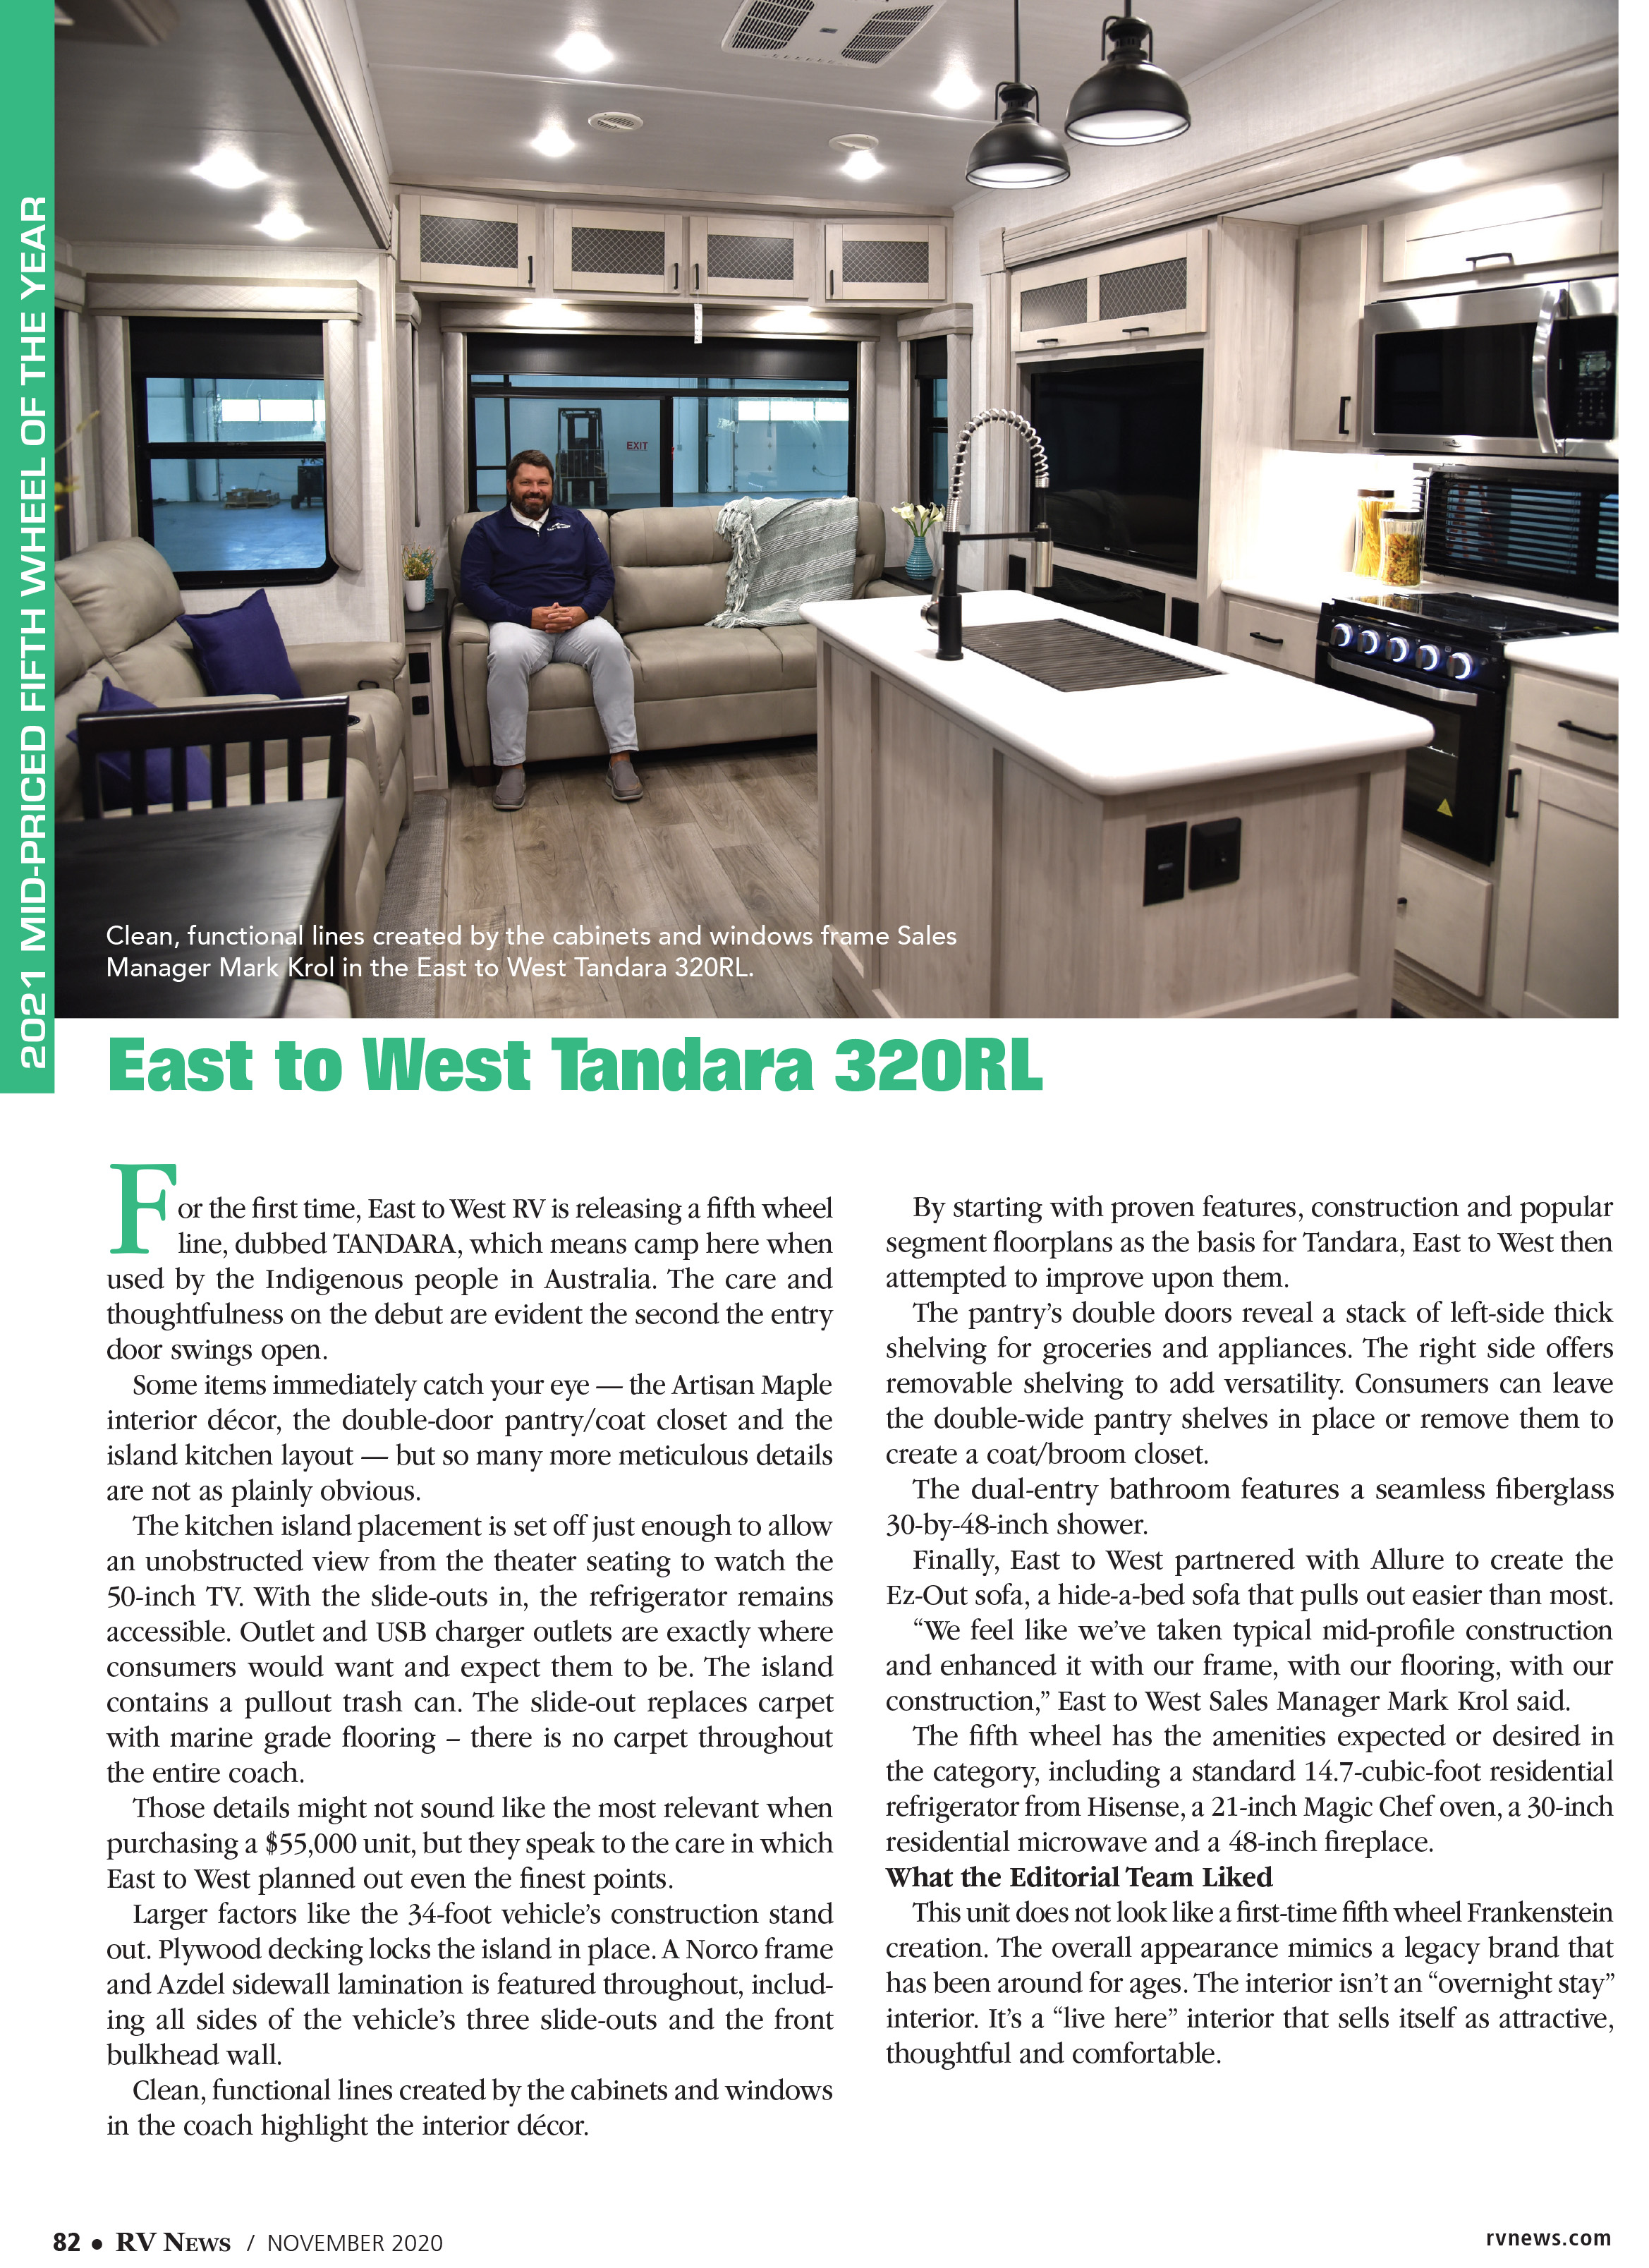 East To West Tandara 1 of 2 : RV News - October 20, 2020